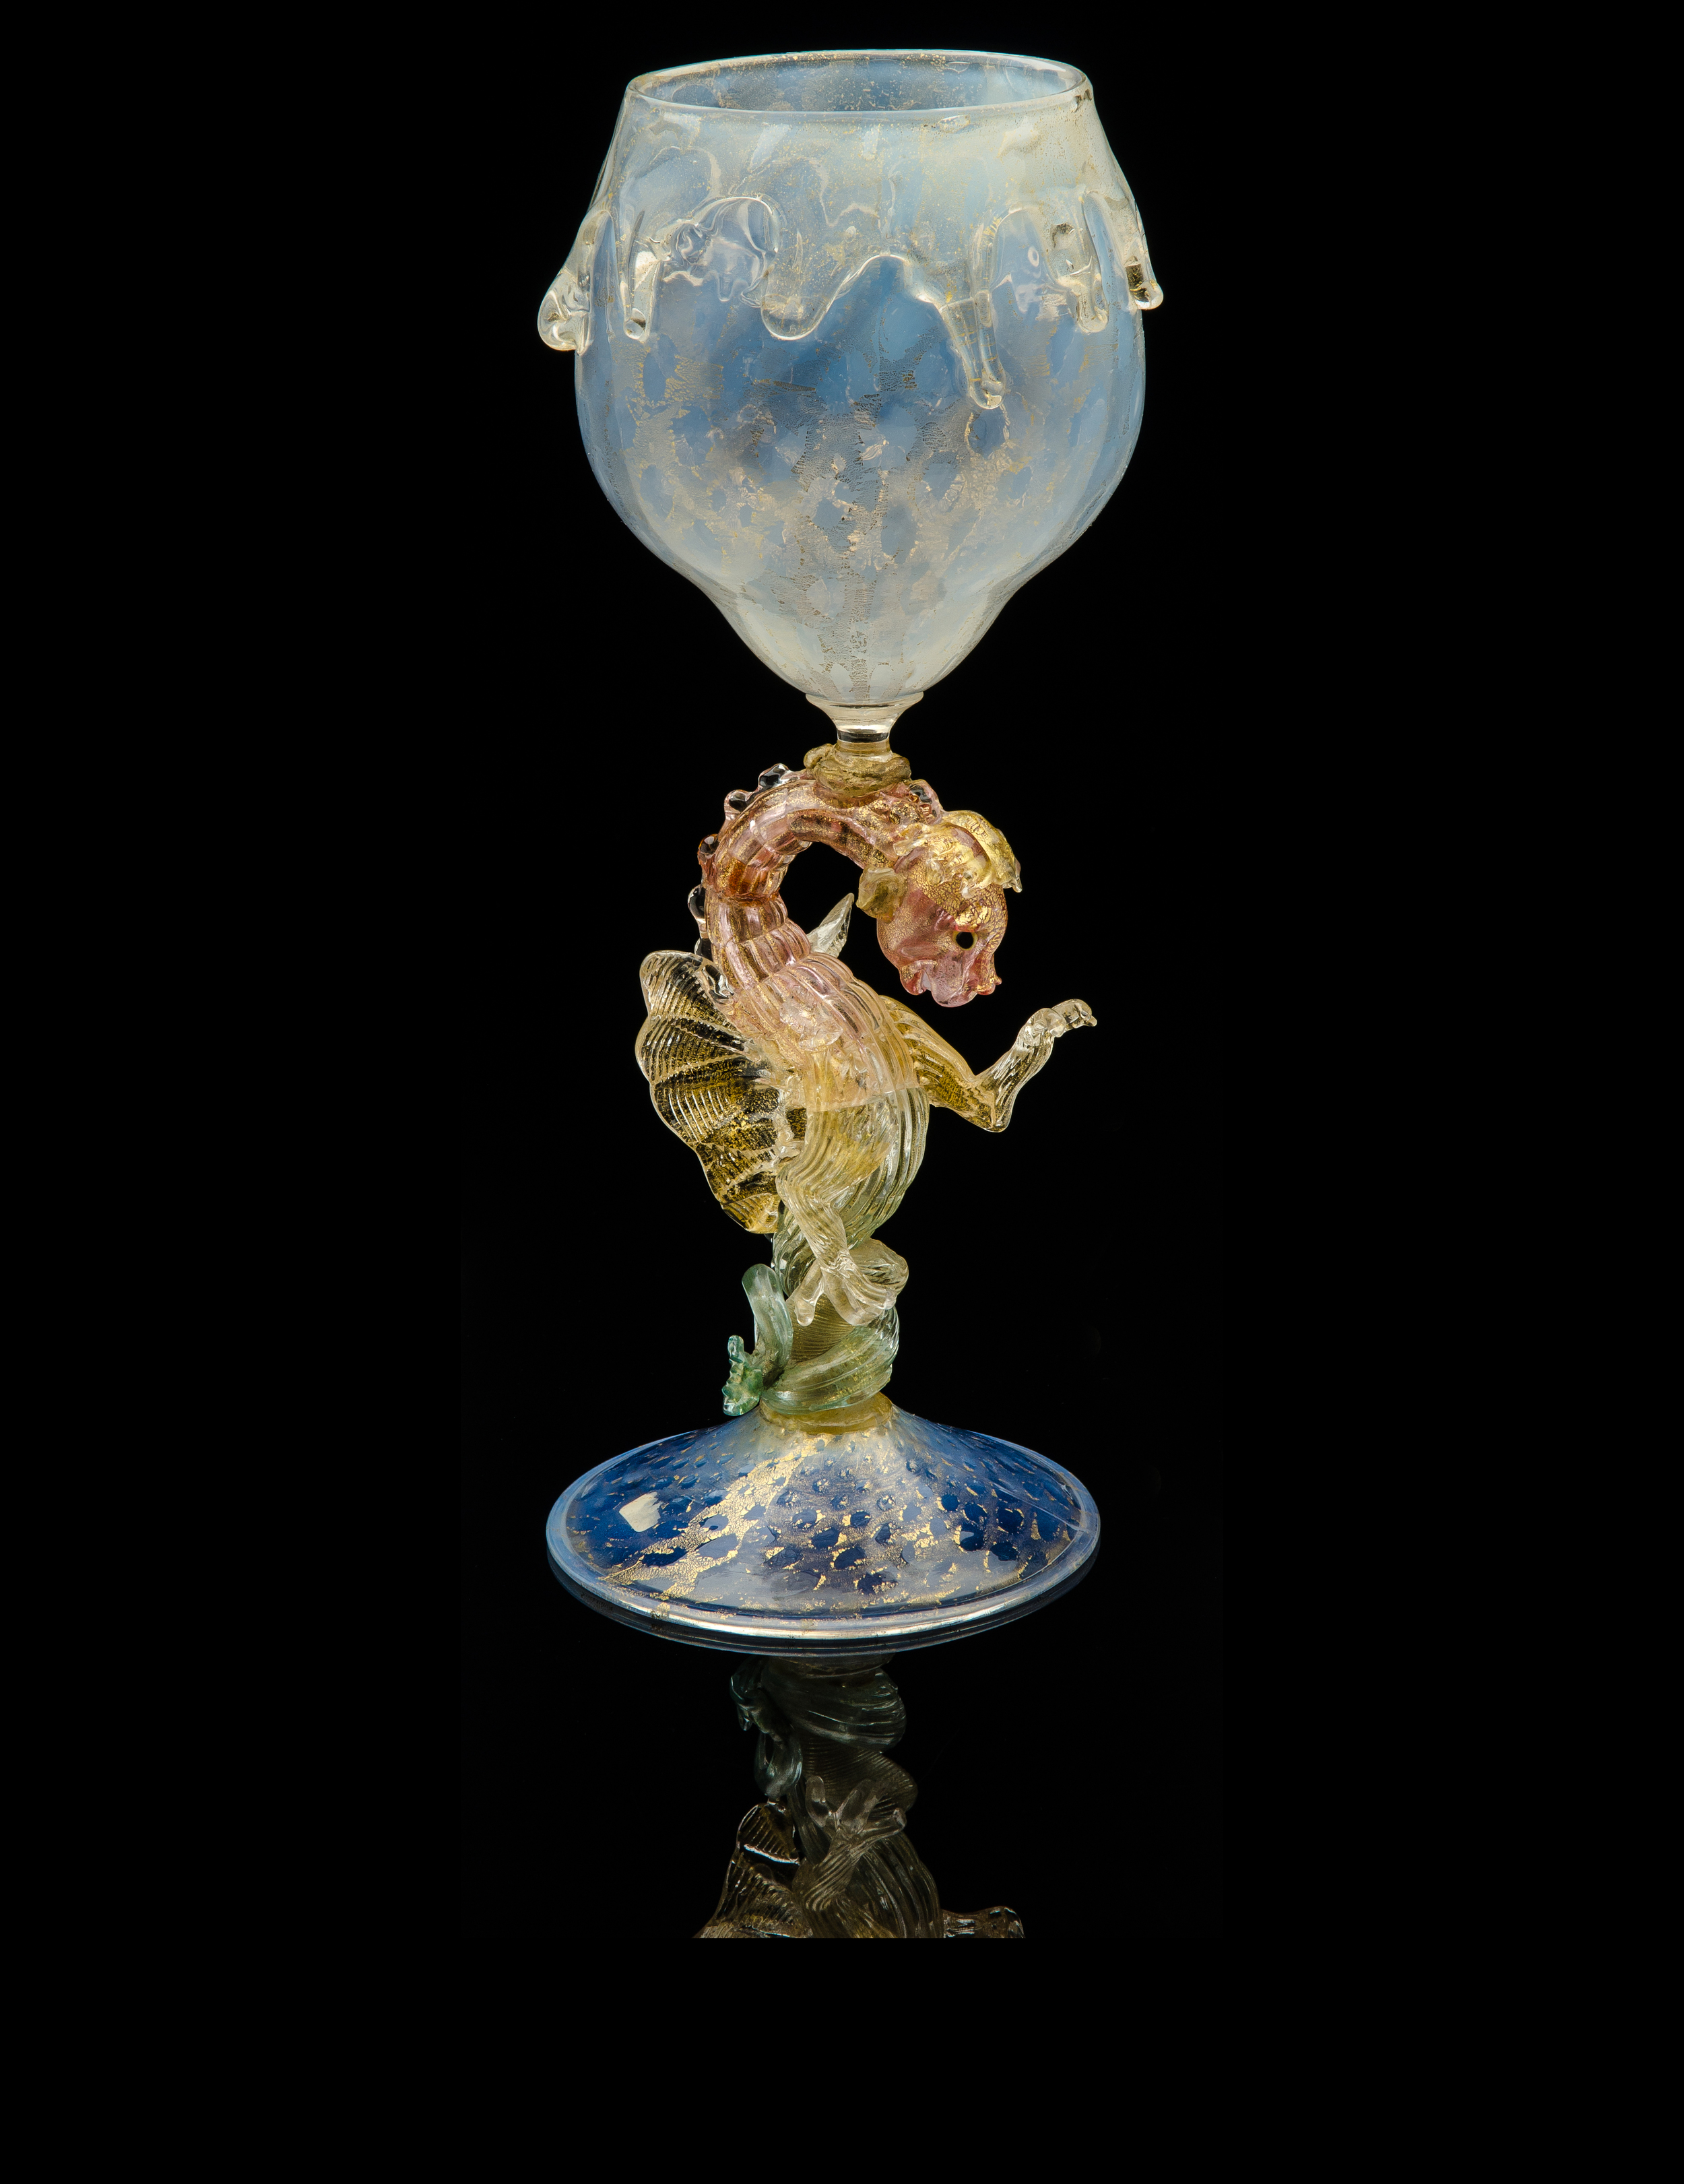  Salviati and Company,&nbsp; Opal and Aventurine Goblet with Dragon Stem&nbsp; (glass, 16 inches), VV.345 